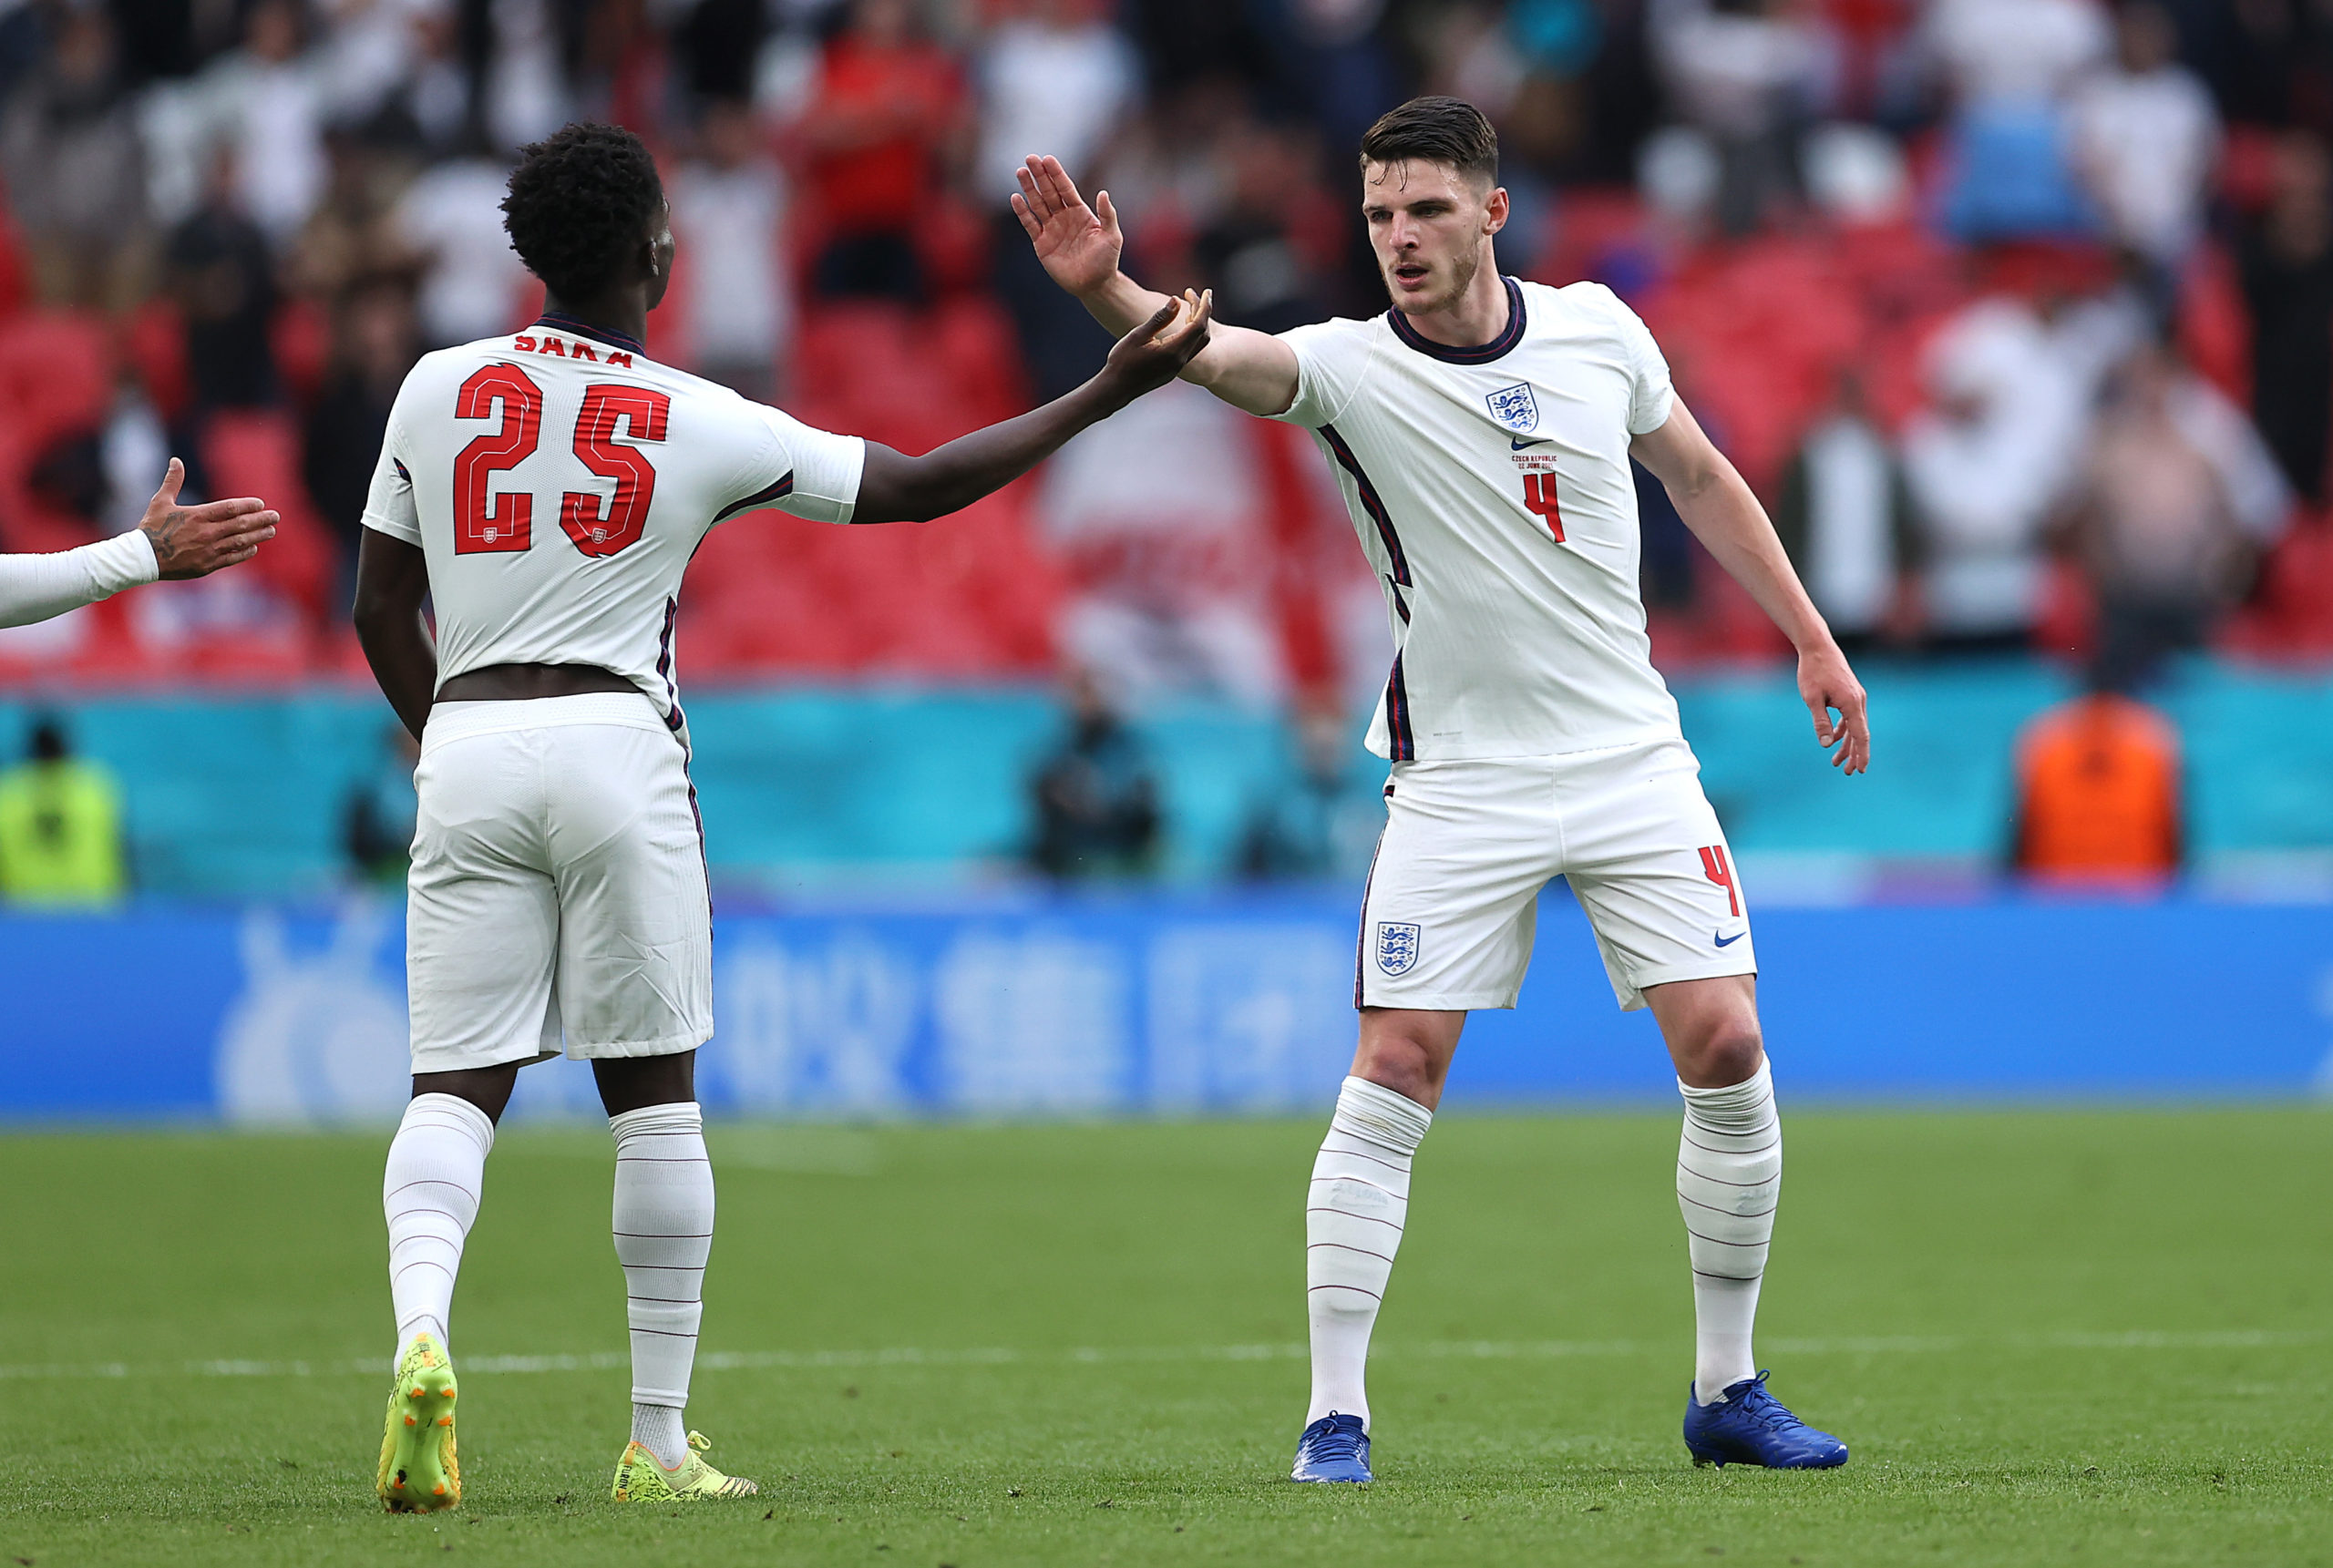 Declan Rice pictured with England star Bukayo Saka just hours before positive Covid test sends him home